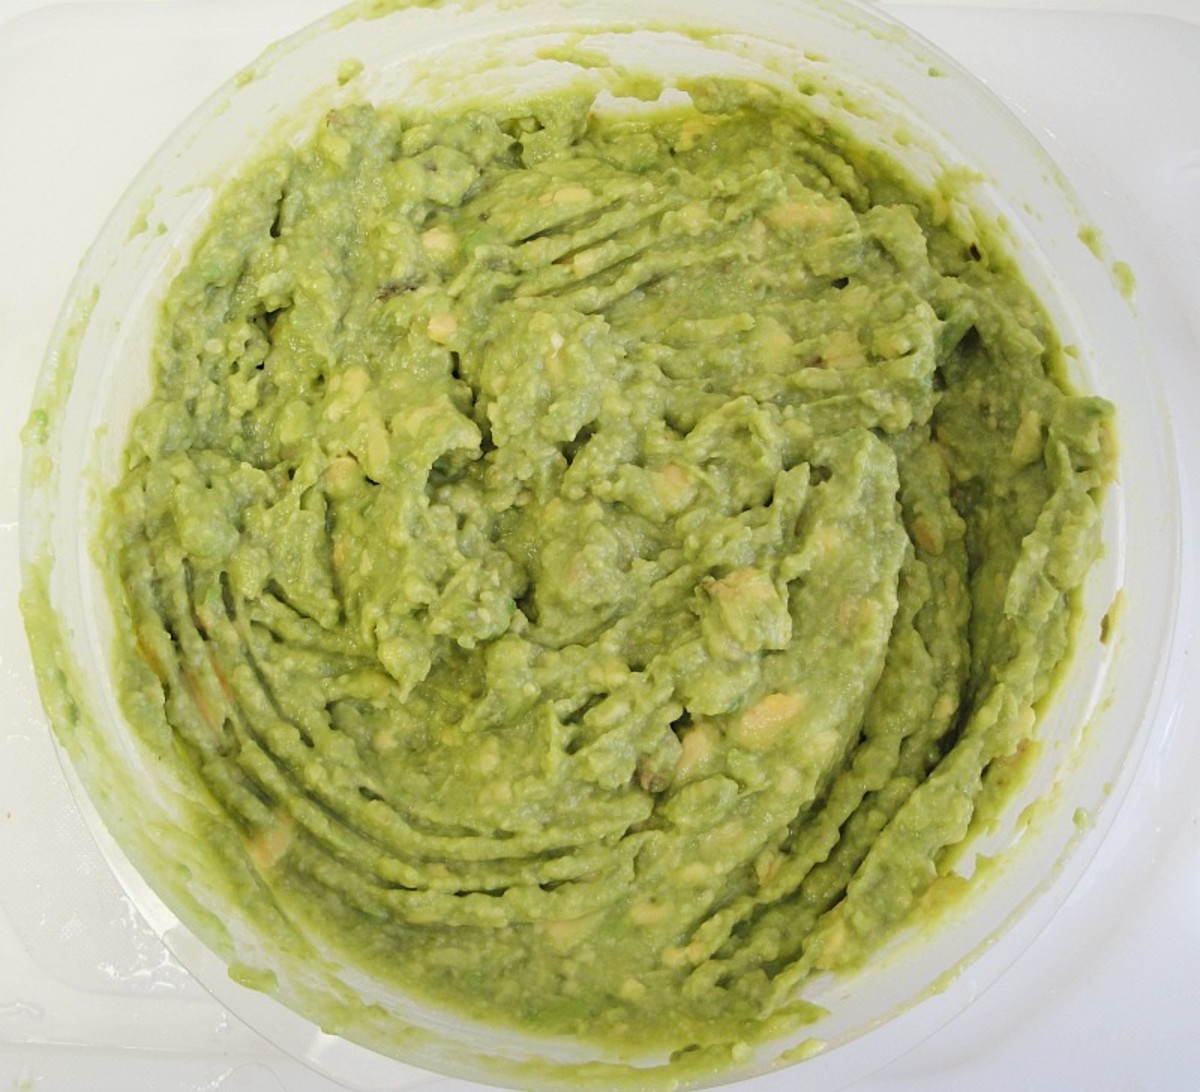 Though it might look like tasty guacamole, pureed avocado can actually work wonders for your skin.